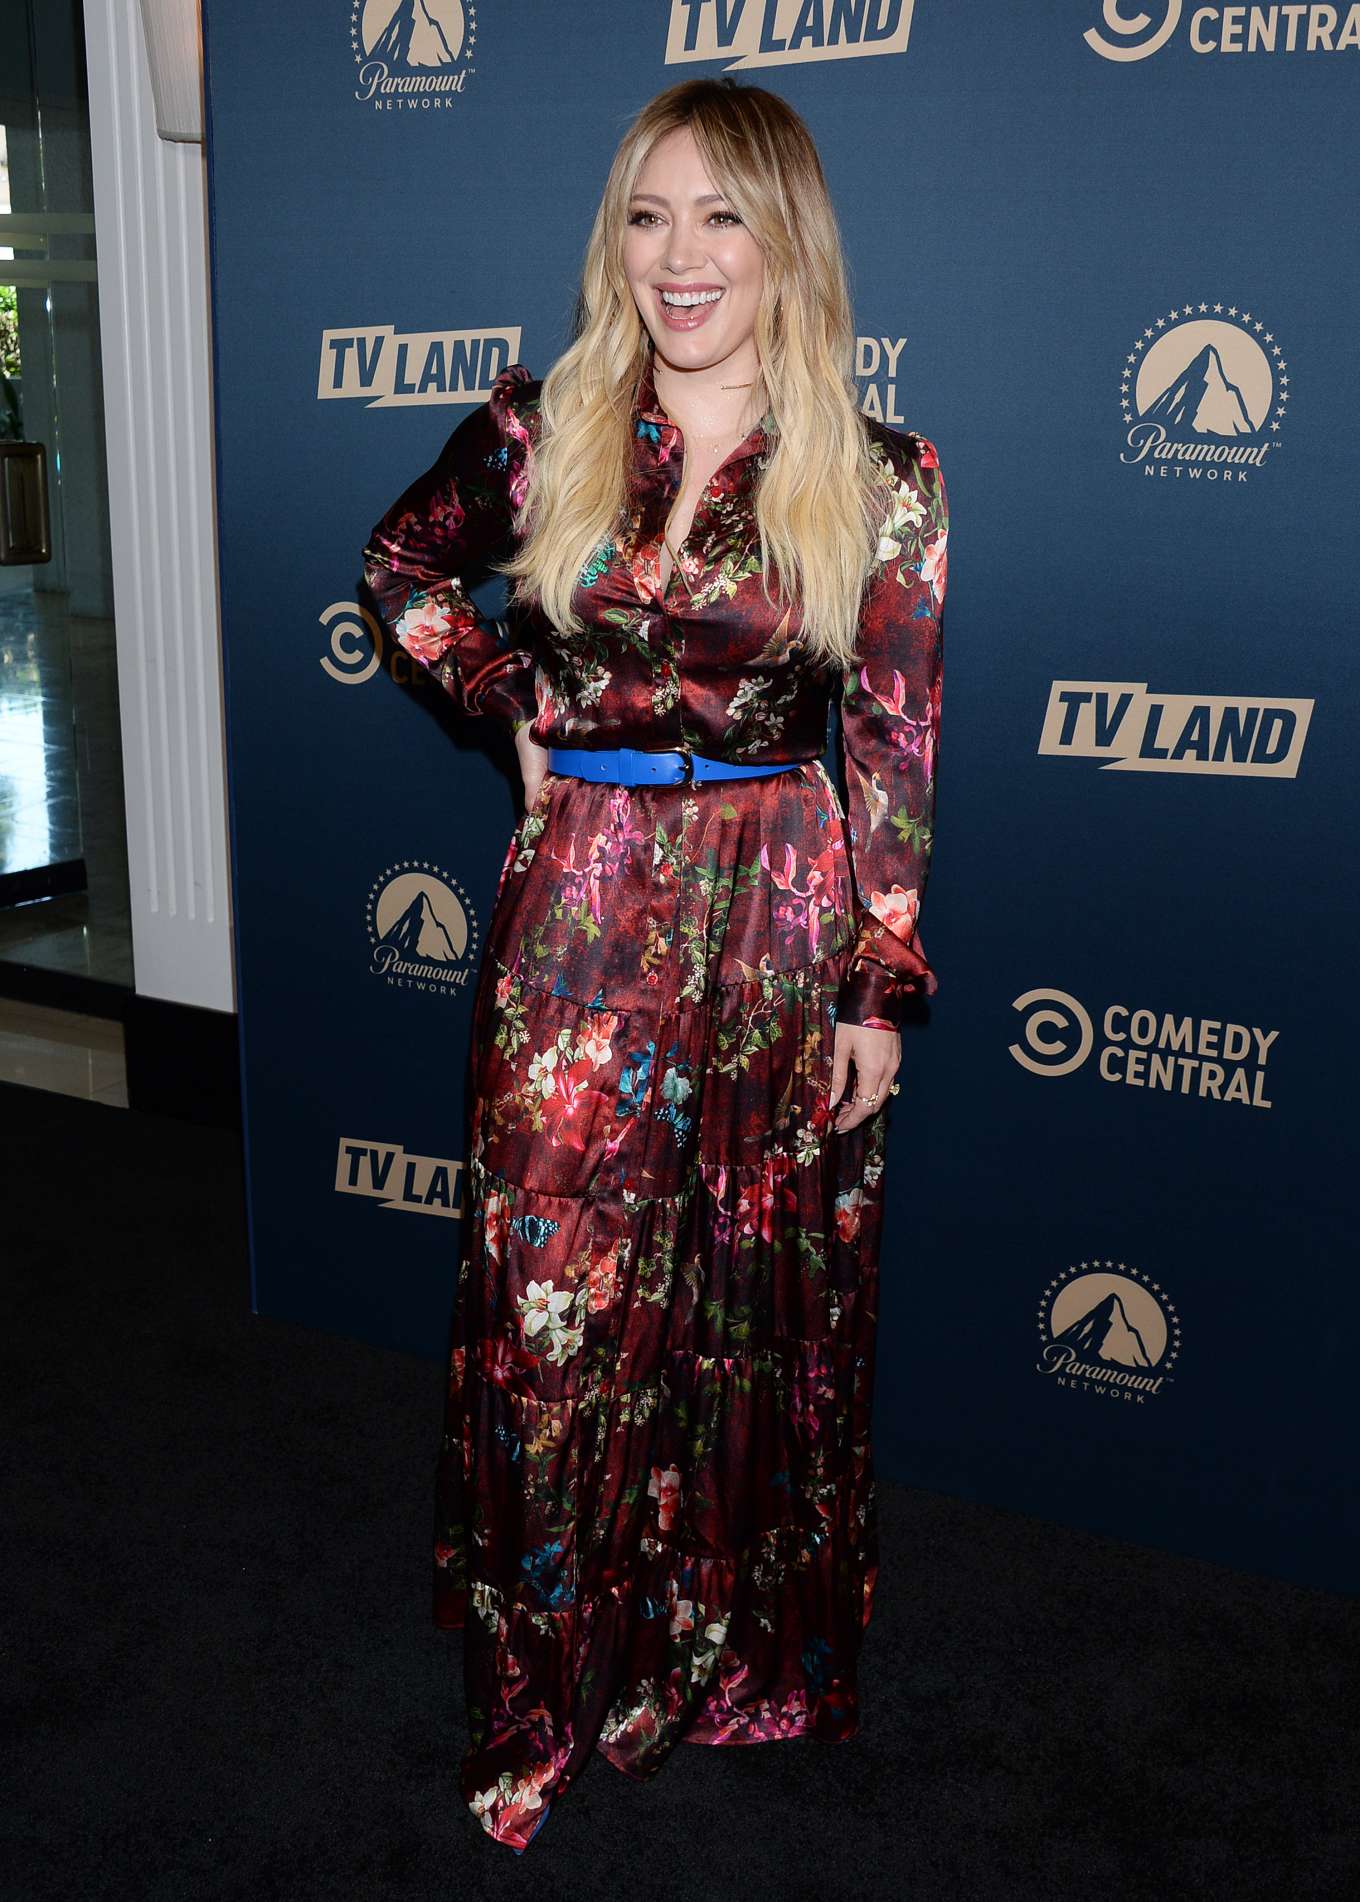 Hilary Duff â€“ Comedy Central, Paramount Network and TV Land Press Day in LA